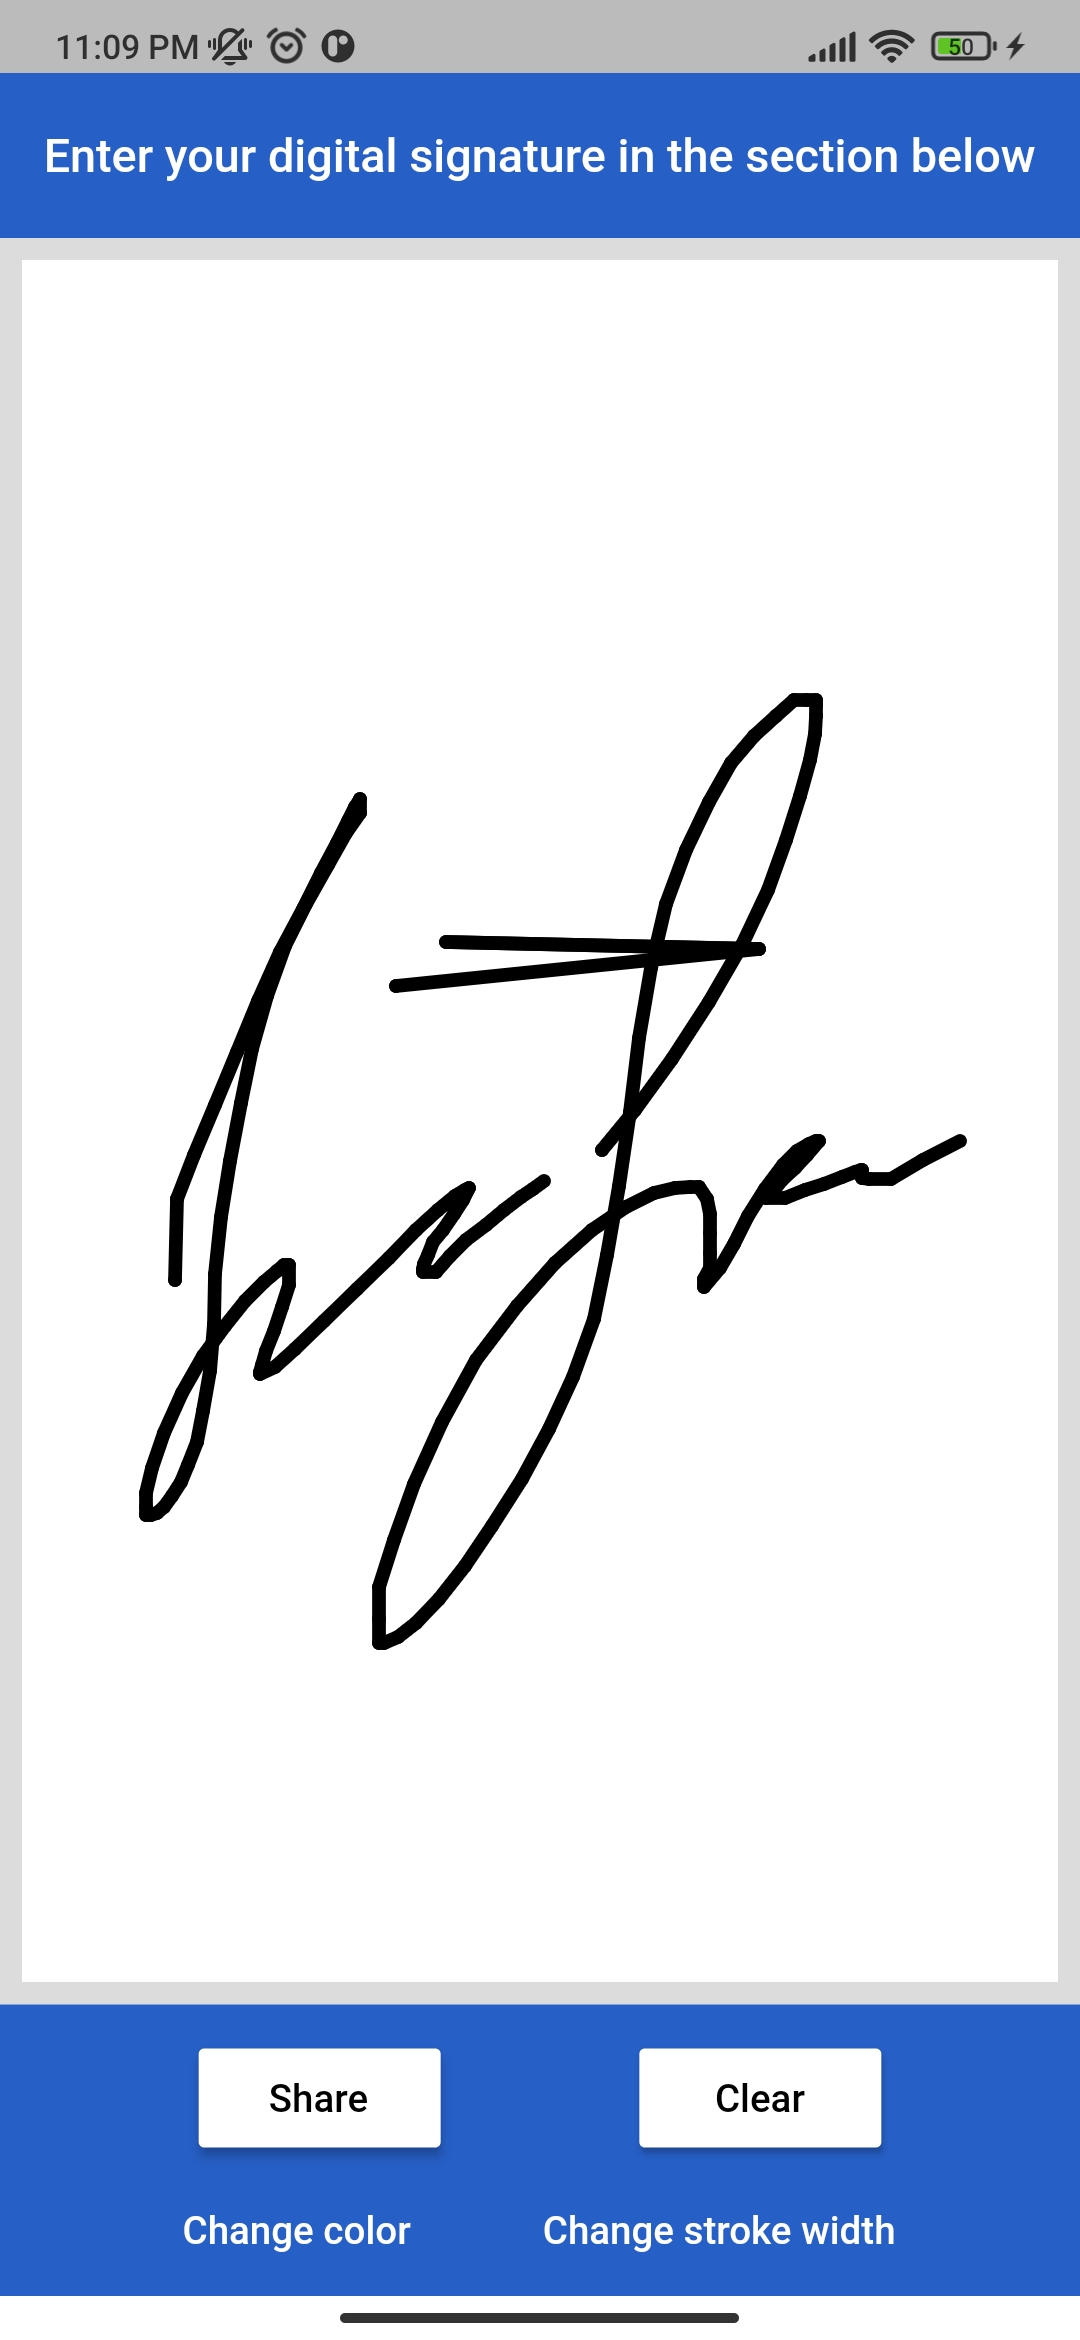 Open-source And Fully Functional Digital Signature App Built With Flutter